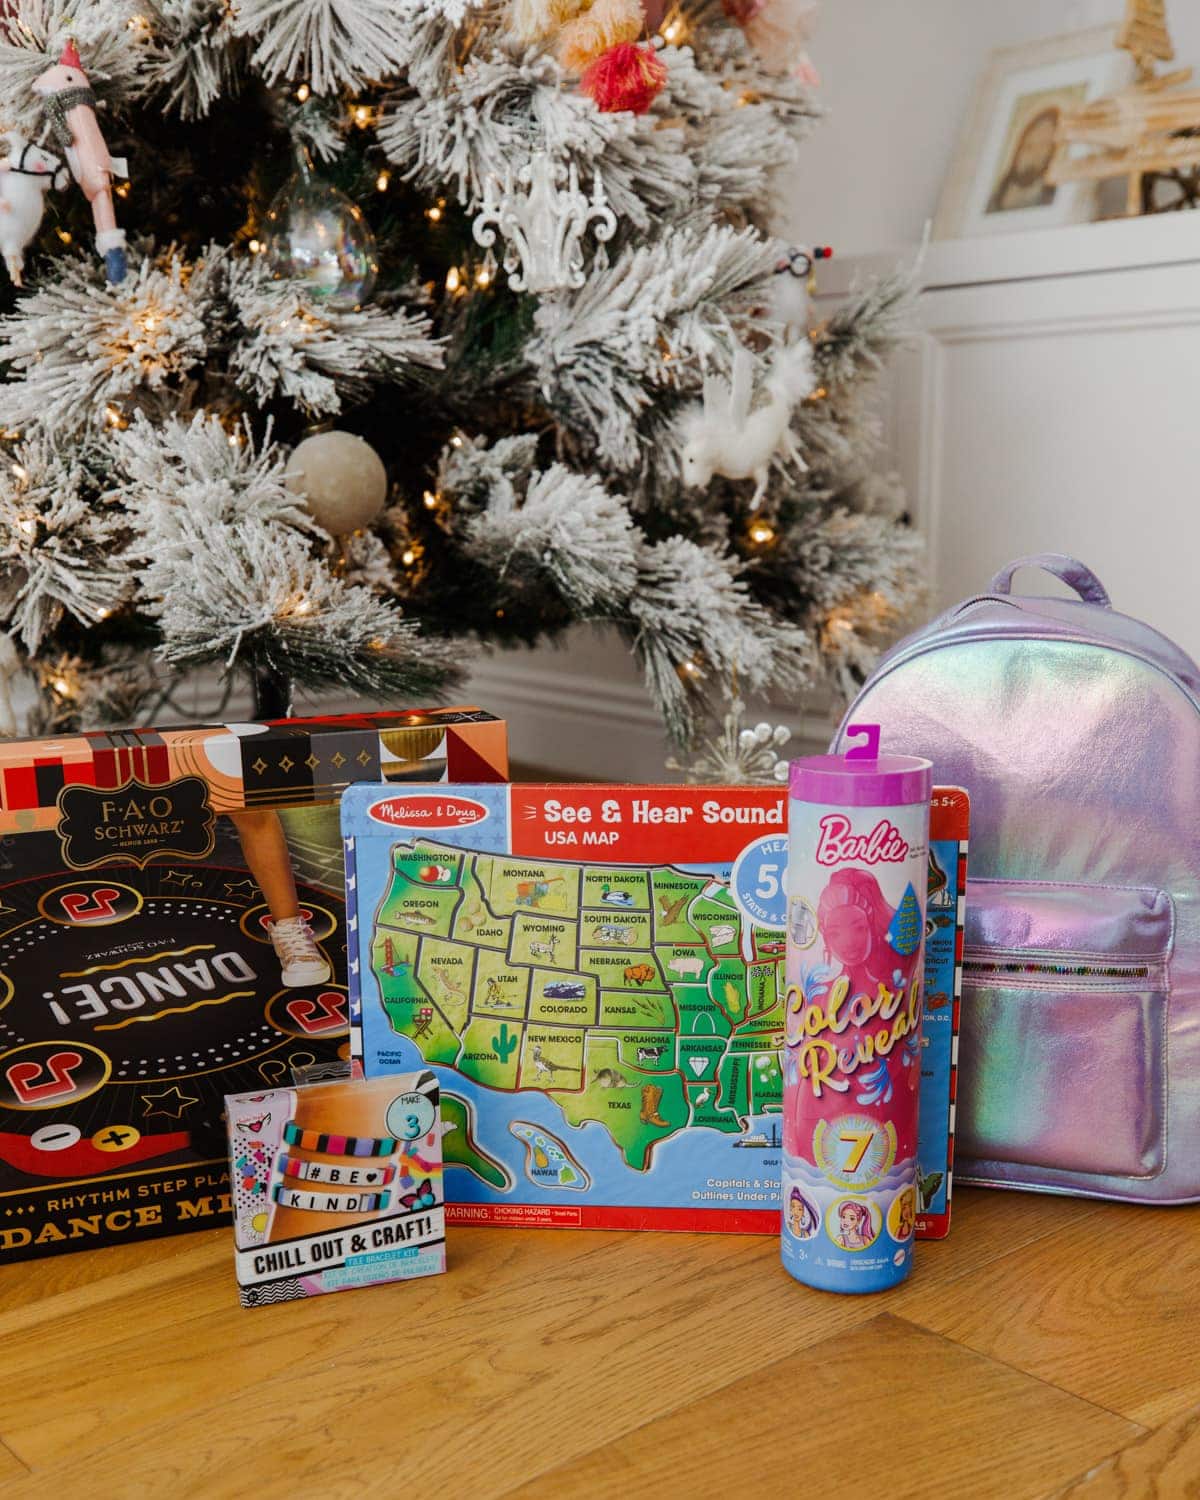 Melissa & Doug Toys on Sale! Stock up your Holiday Gift Closet!